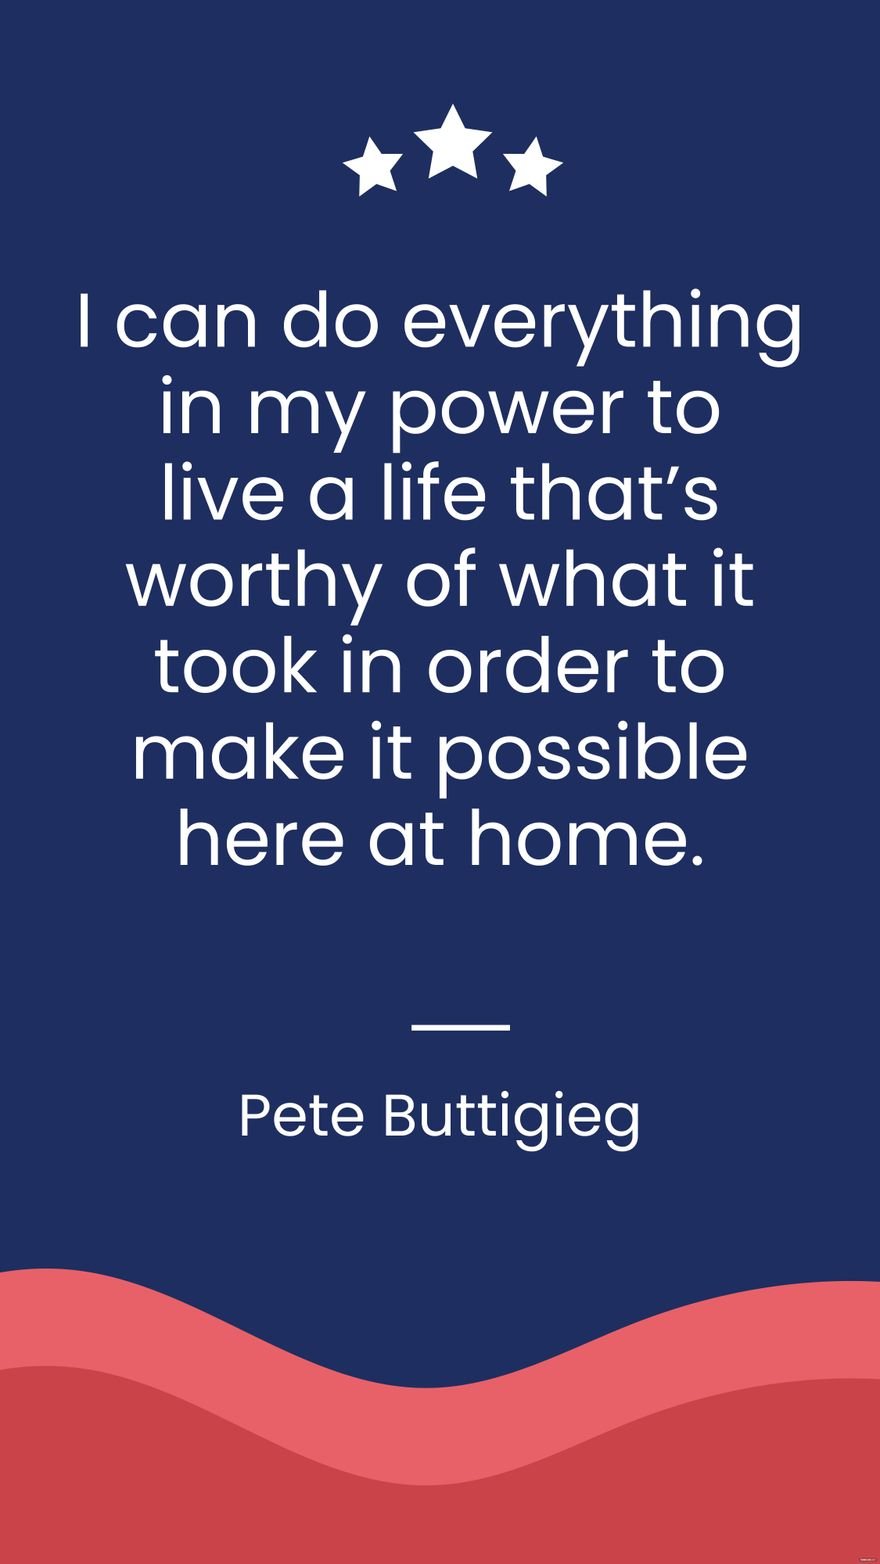 Pete Buttigieg - I can do everything in my power to live a life that's worthy of what it took in order to make it possible to be here at home. in JPG